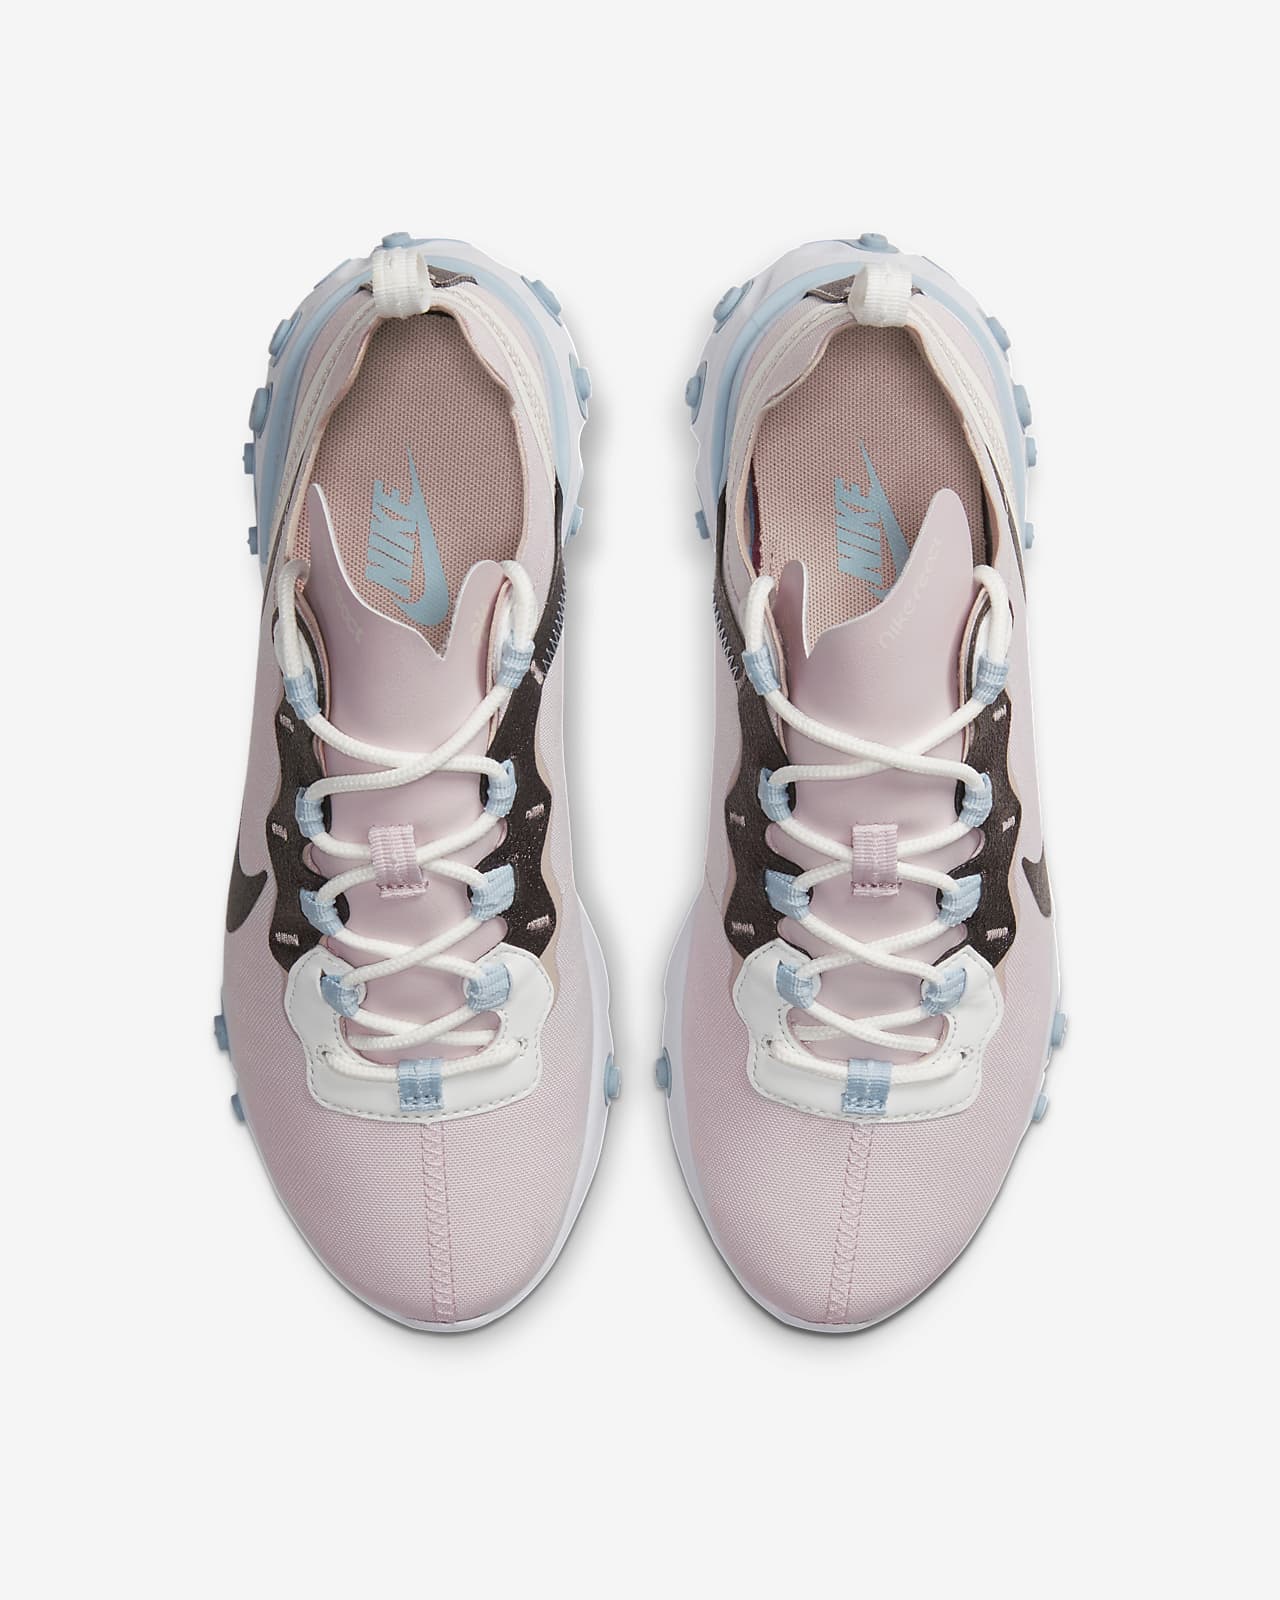 nike element reacts womens